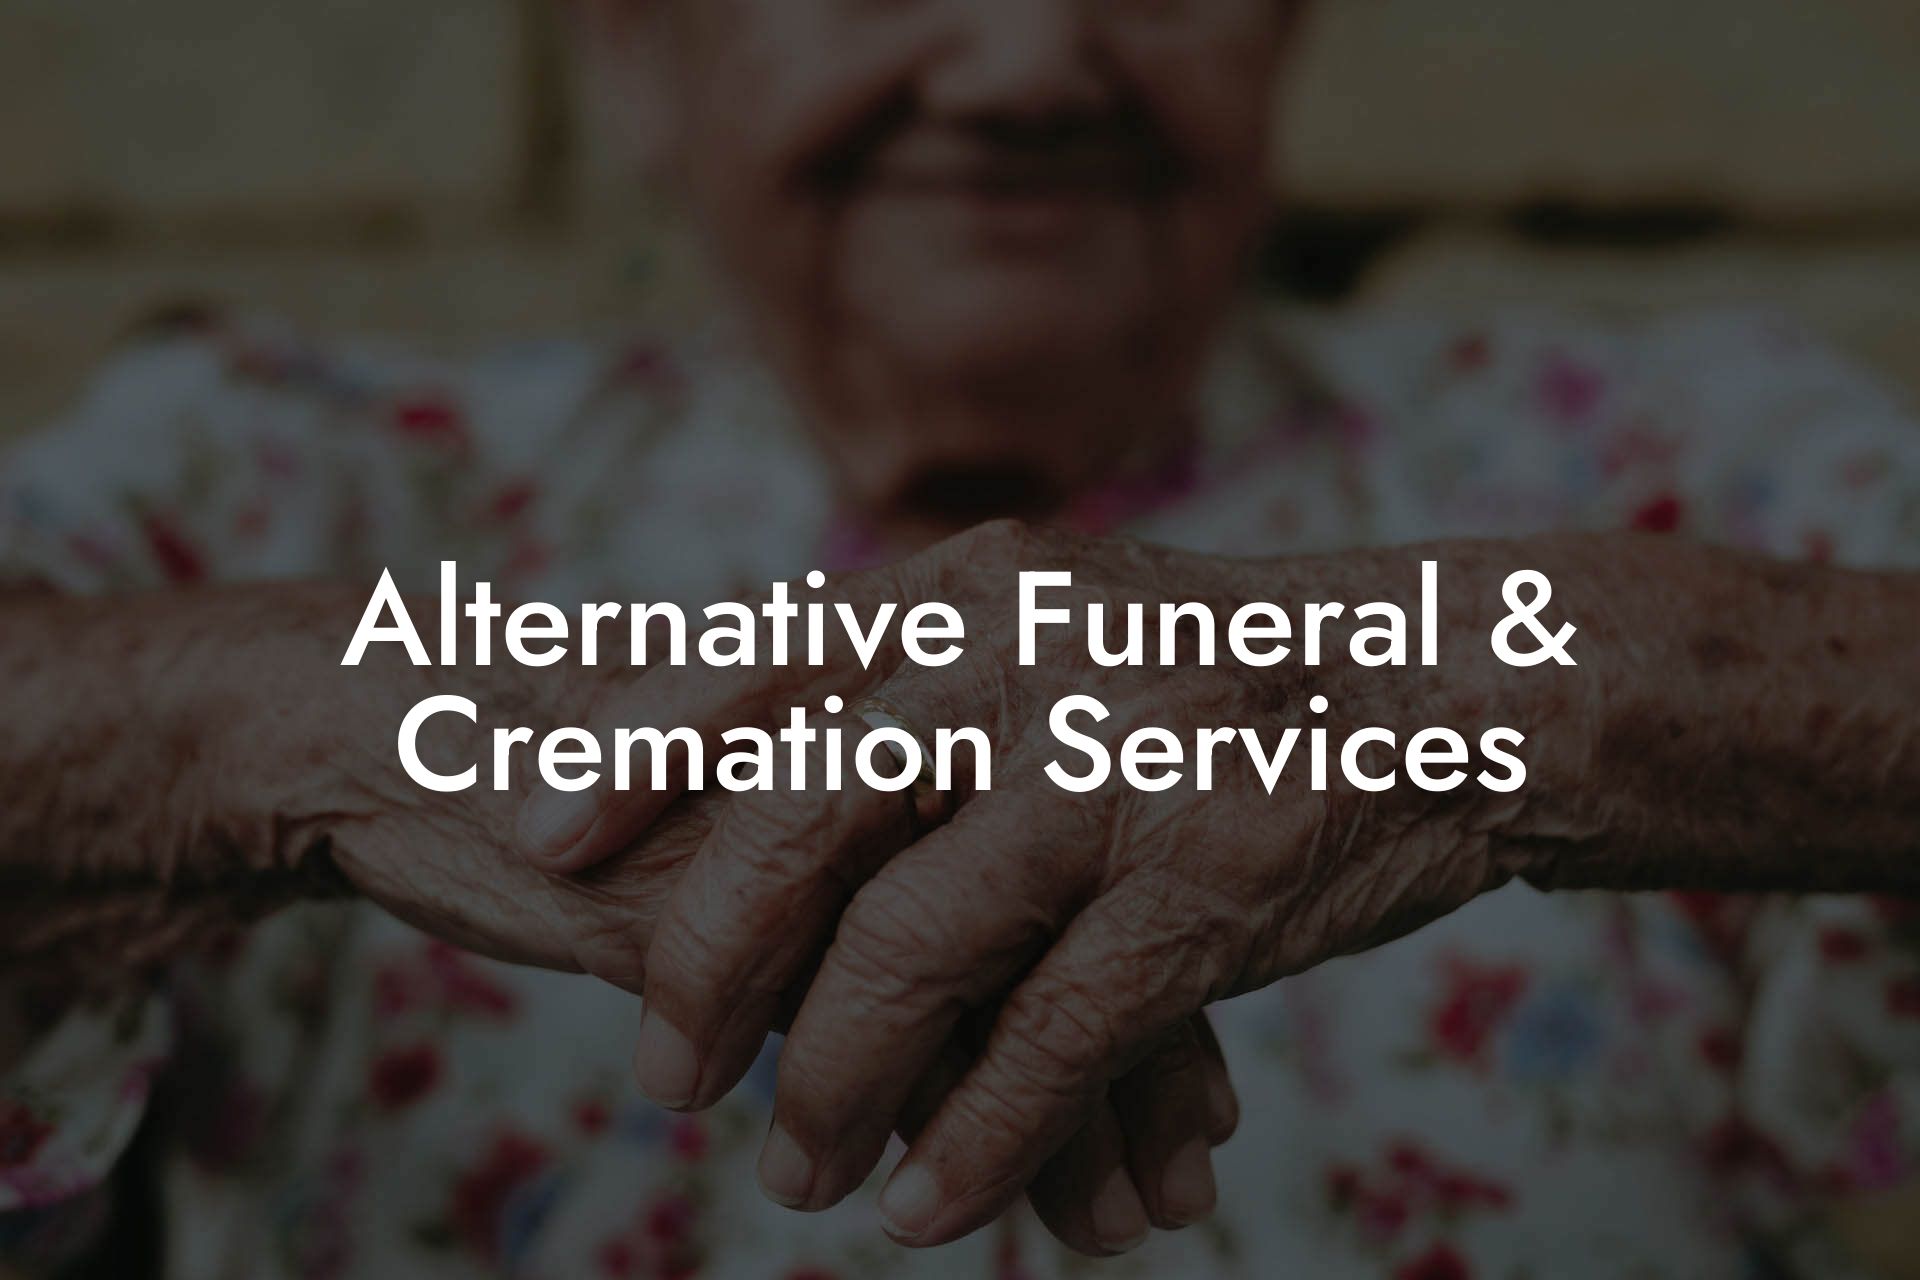 Alternative Funeral & Cremation Services